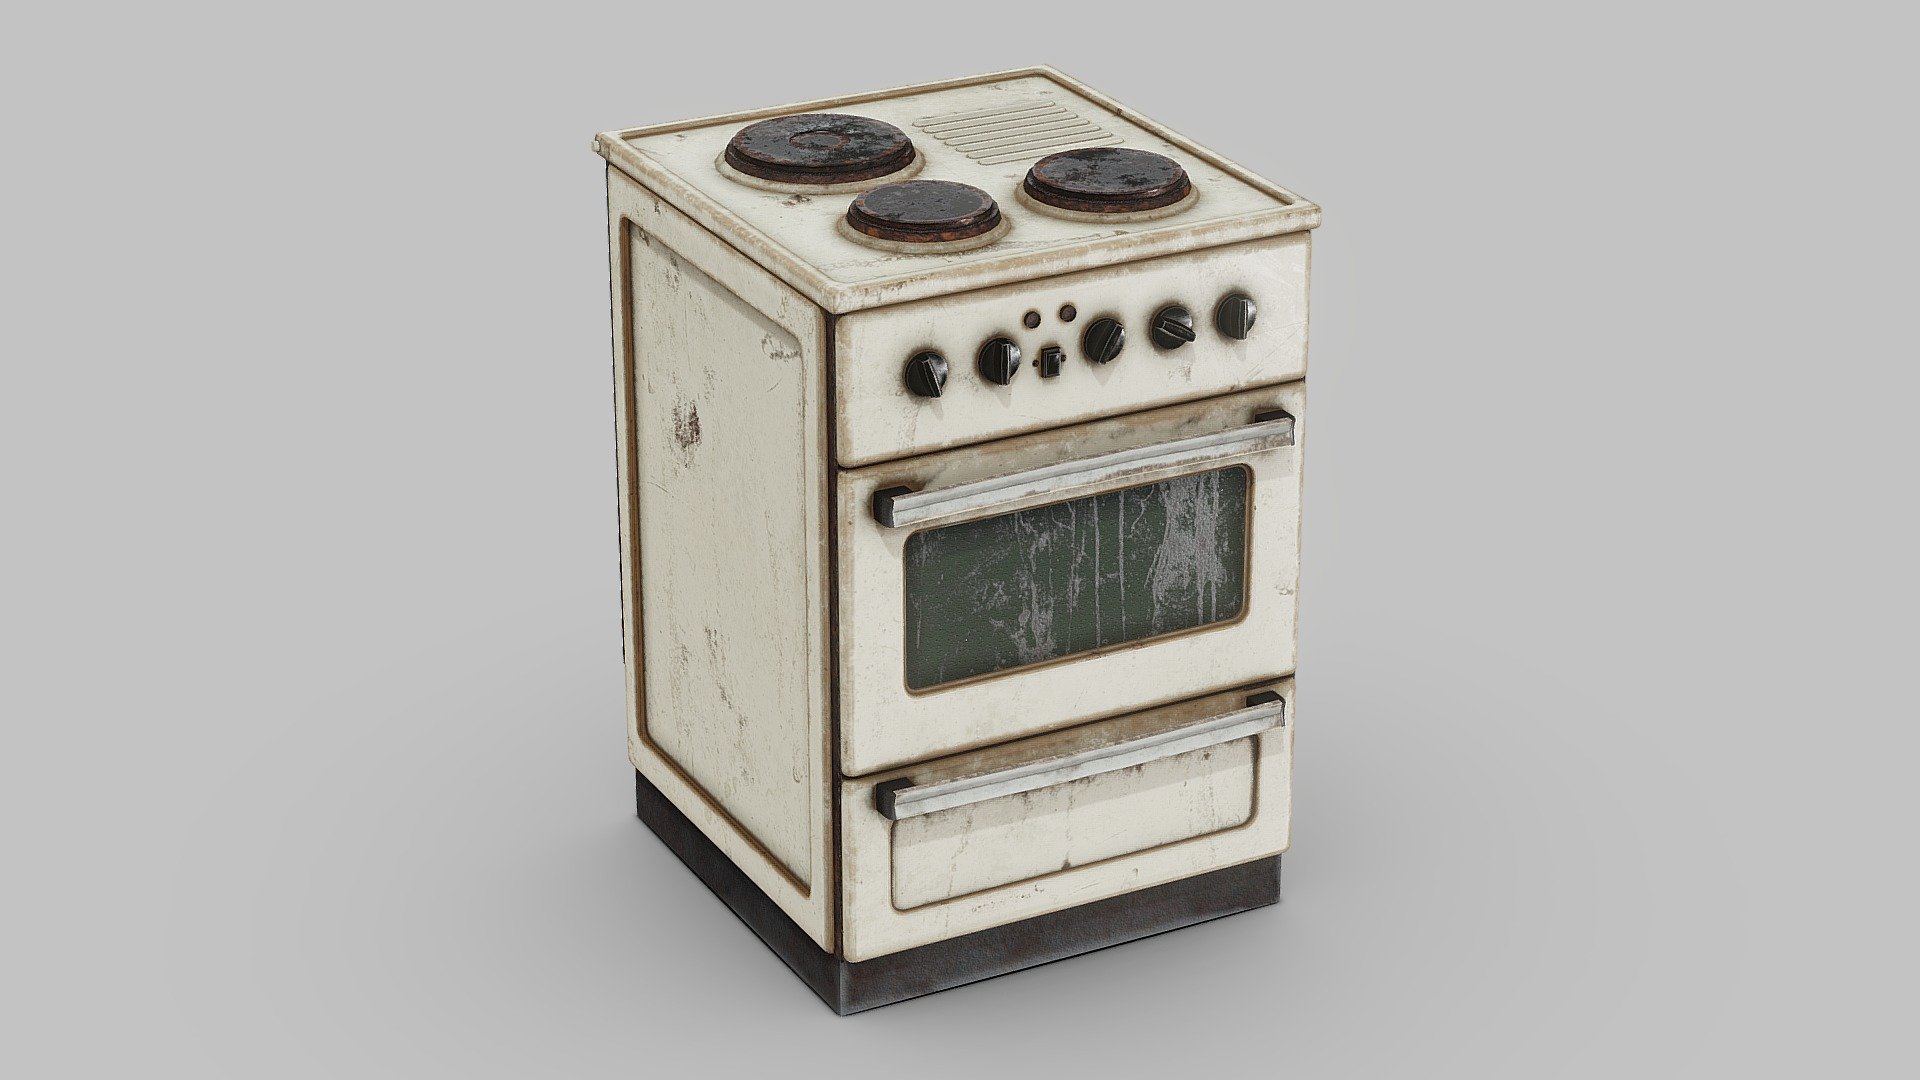 Free download：www.freepoly.org - Old Rusty Stove-Freepoly.org - Download Free 3D model by Freepoly.org (@blackrray) 3d model